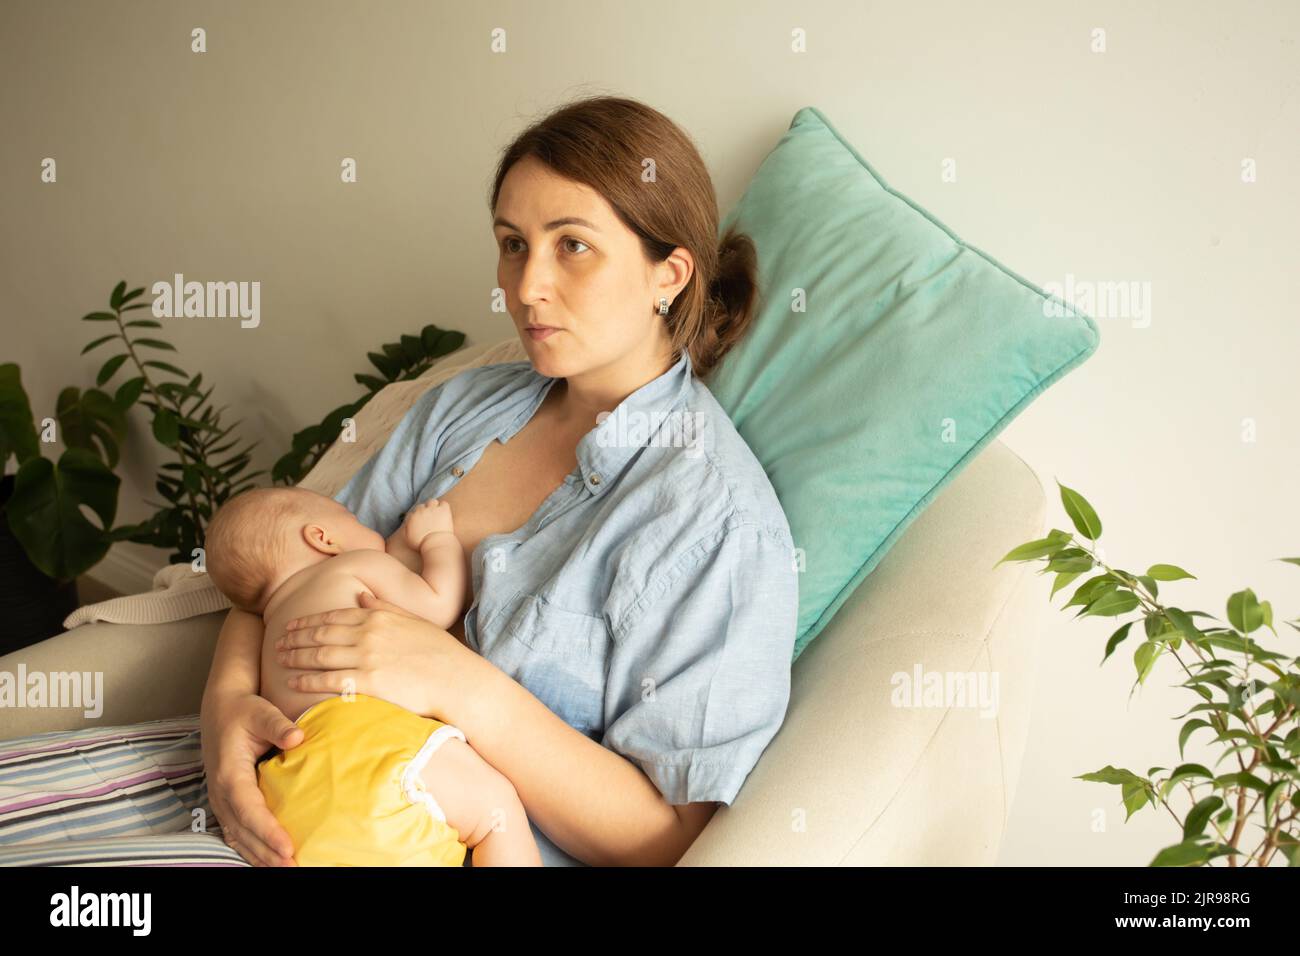 Mothed and baby at the chair. Breastfeeding in cradle position Stock Photo